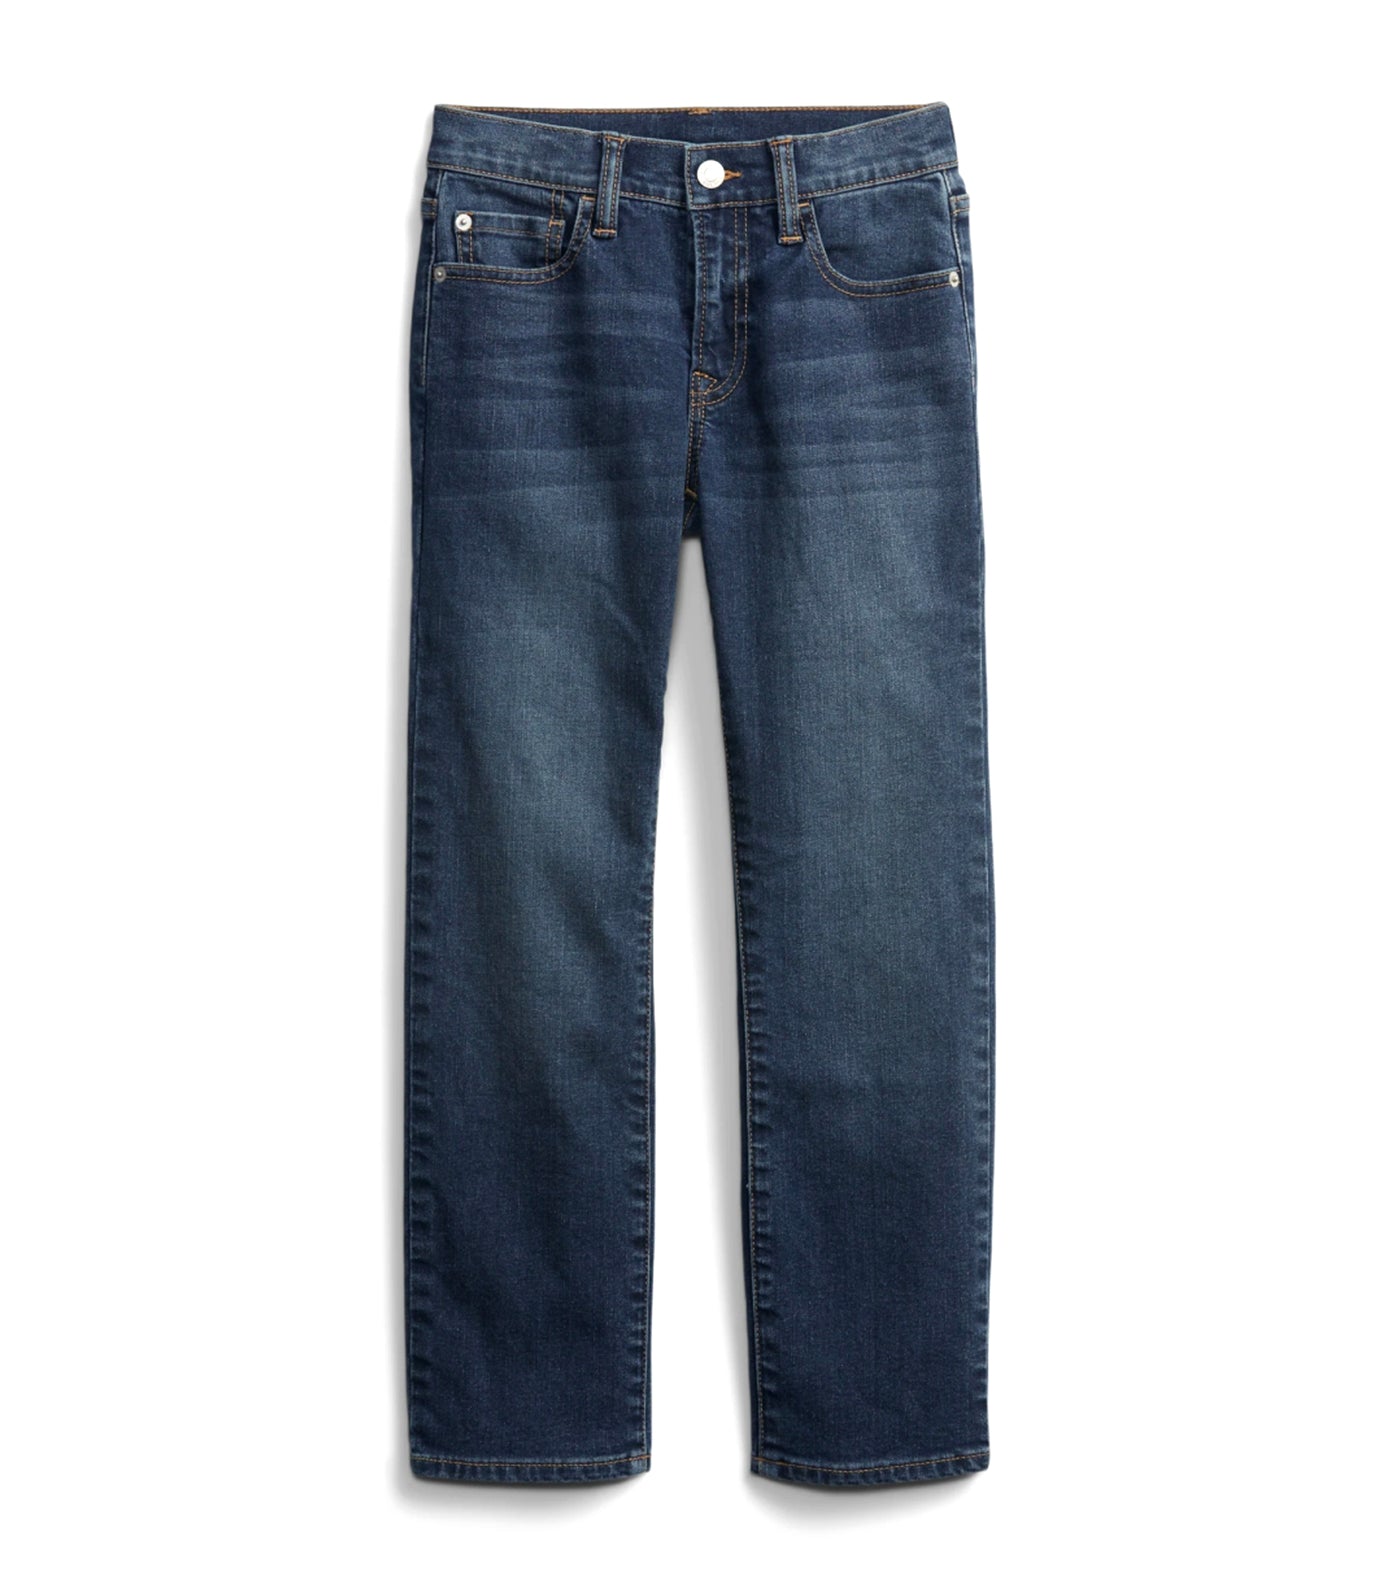 Kids Straight Jeans with Washwell - Medium Wash